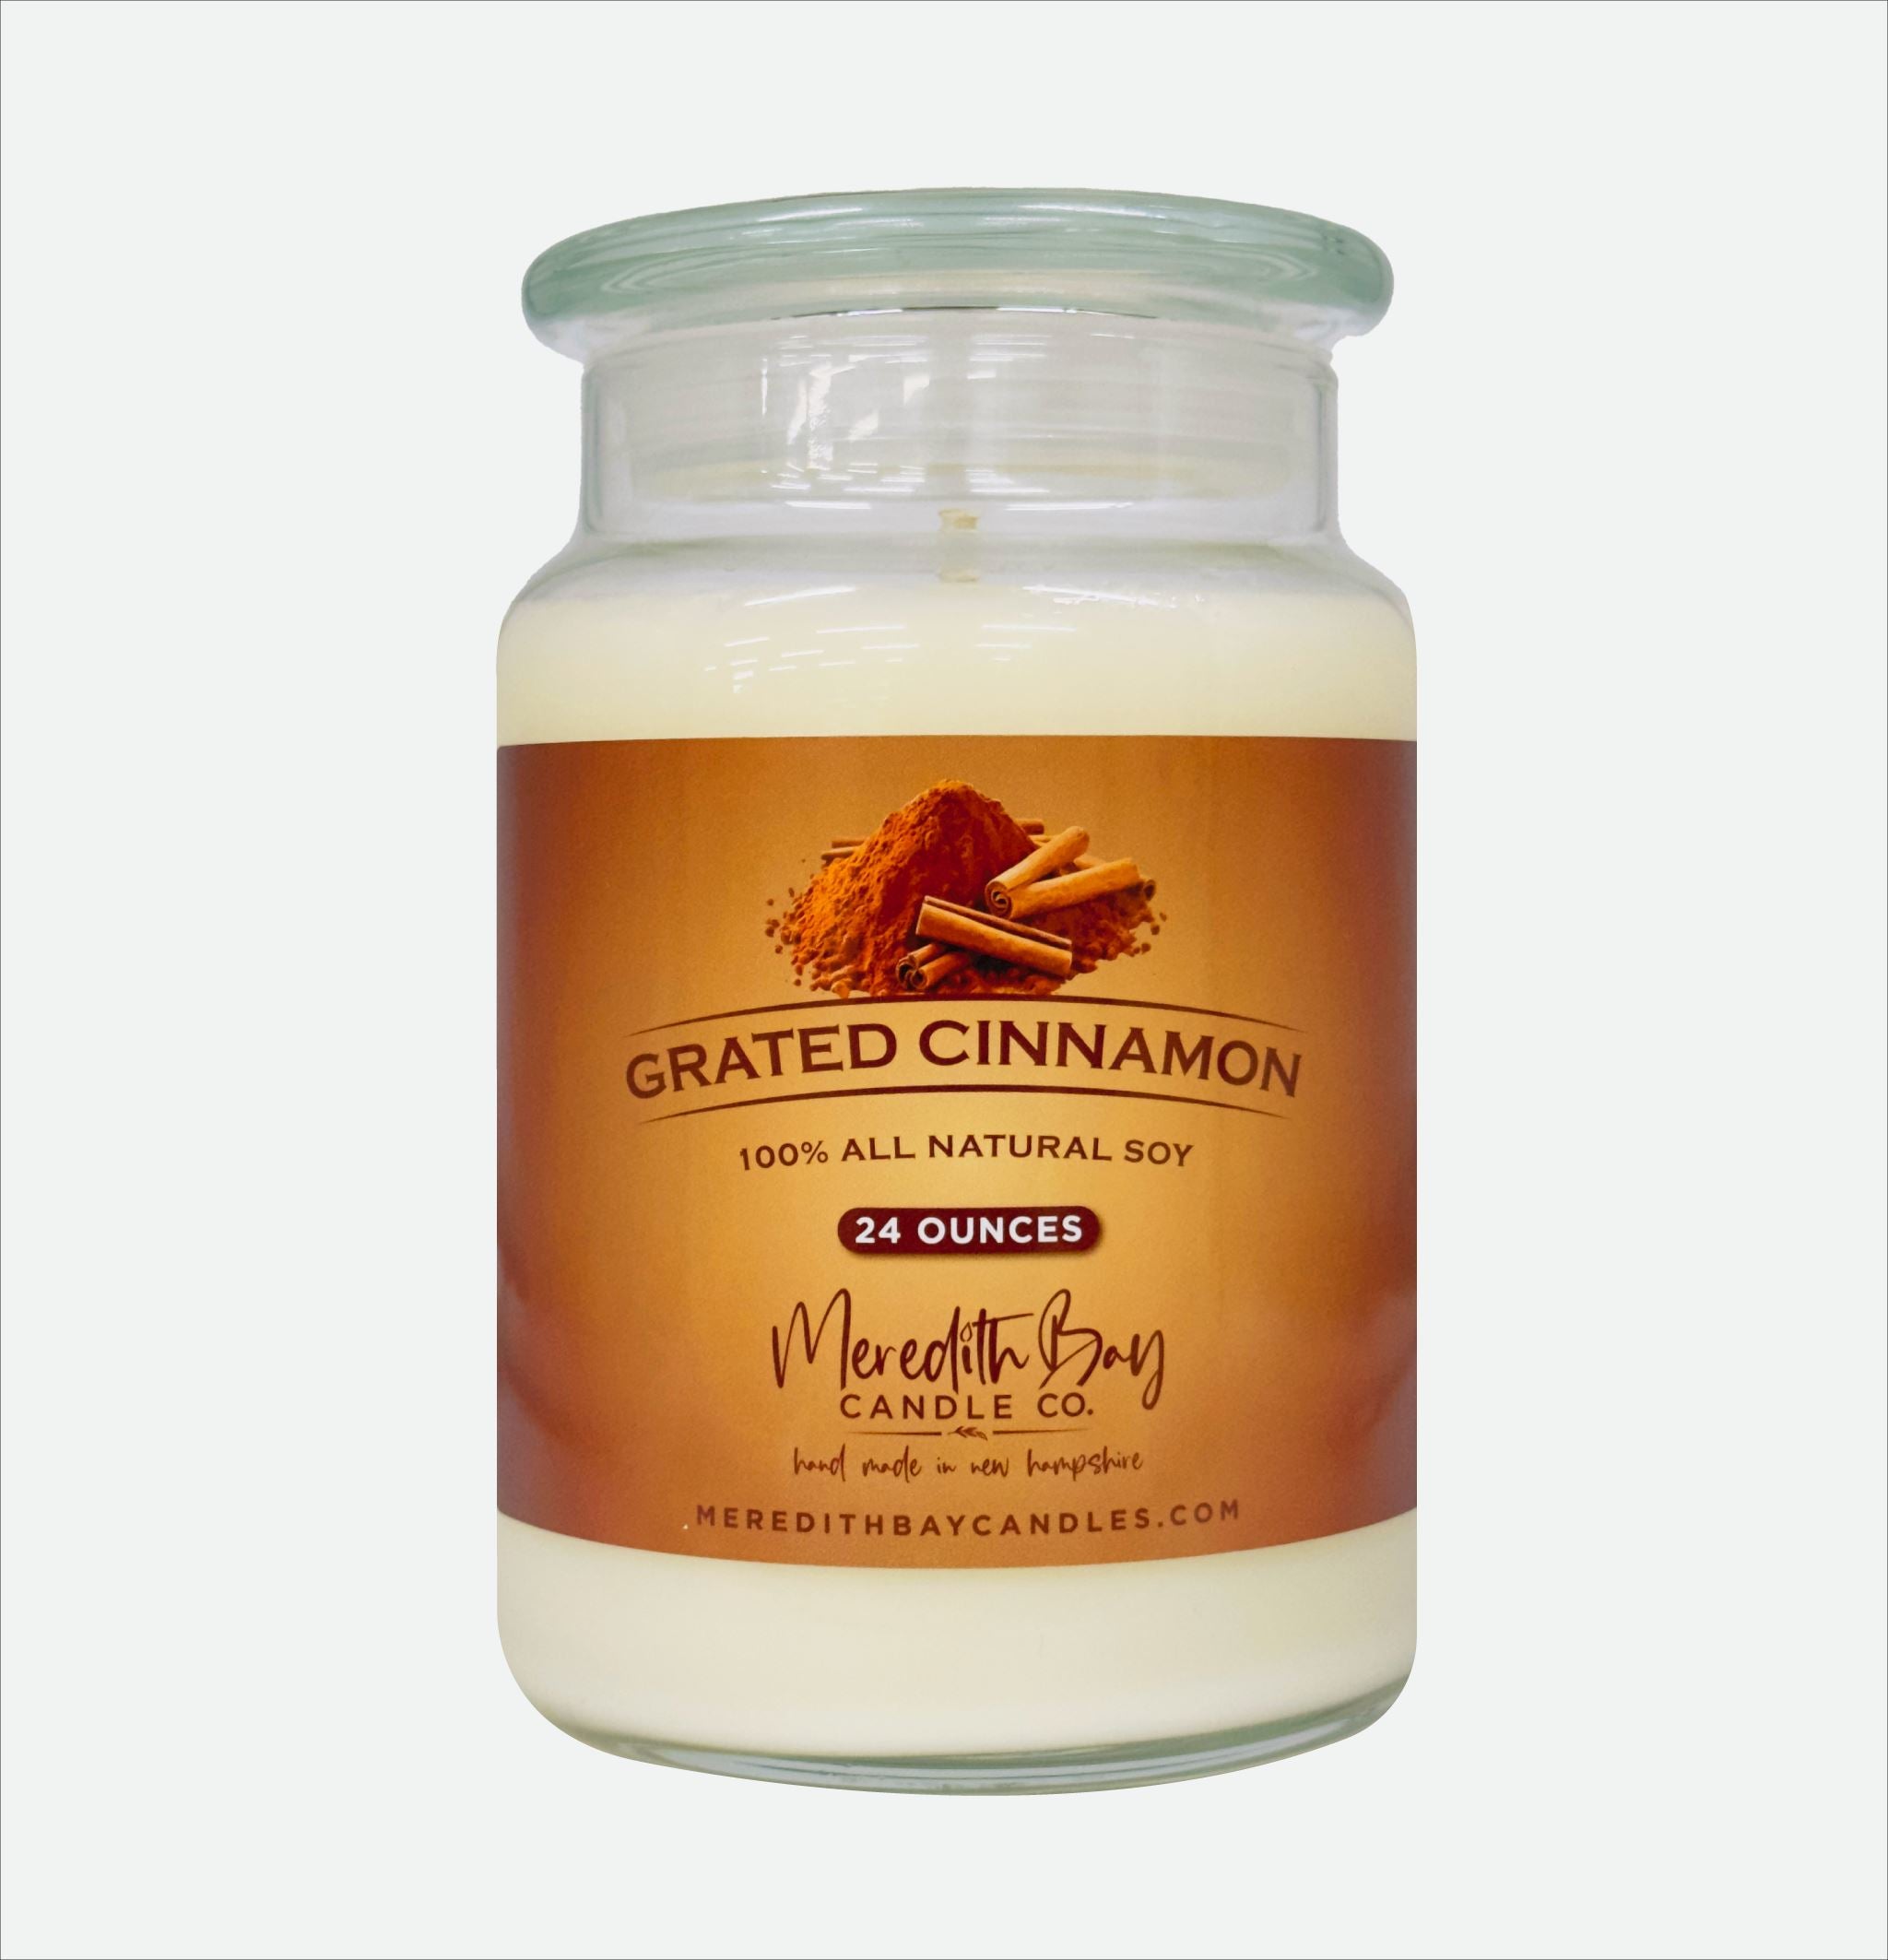 Grated Cinnamon Soy Candle Meredith Bay Candle Co 24 Oz 